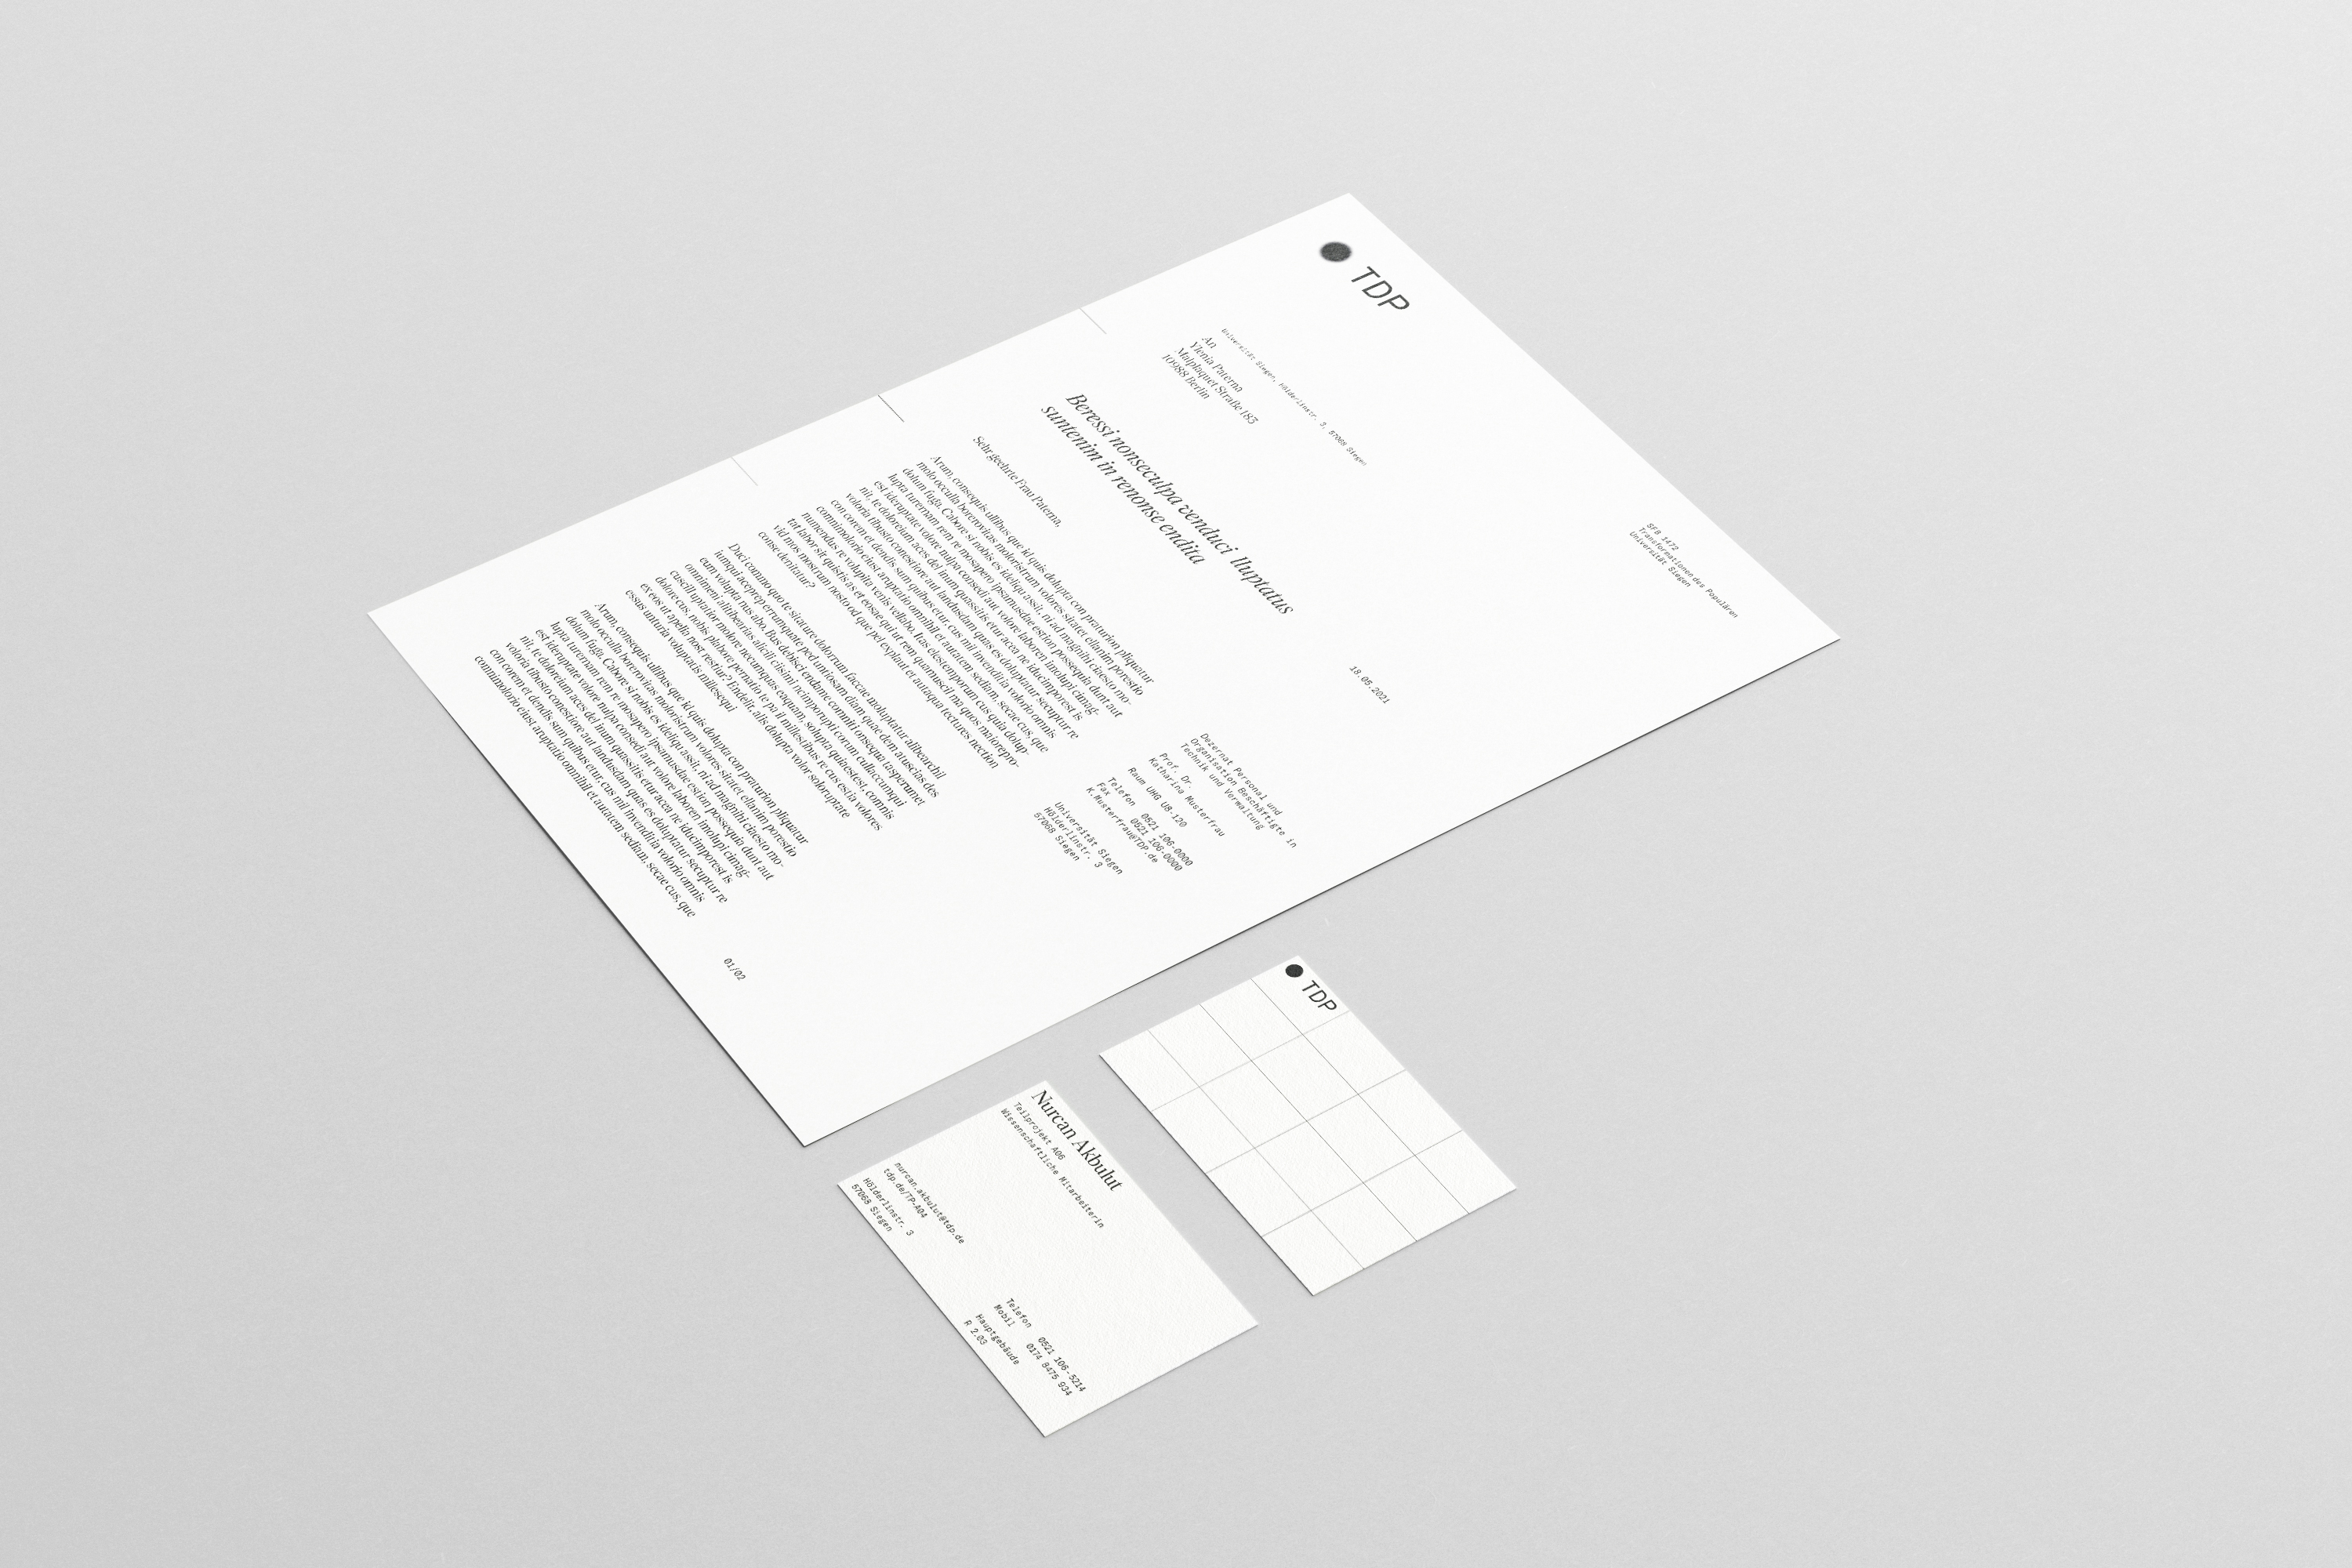 Stationery set for TDP including letter design and business cards front and back.